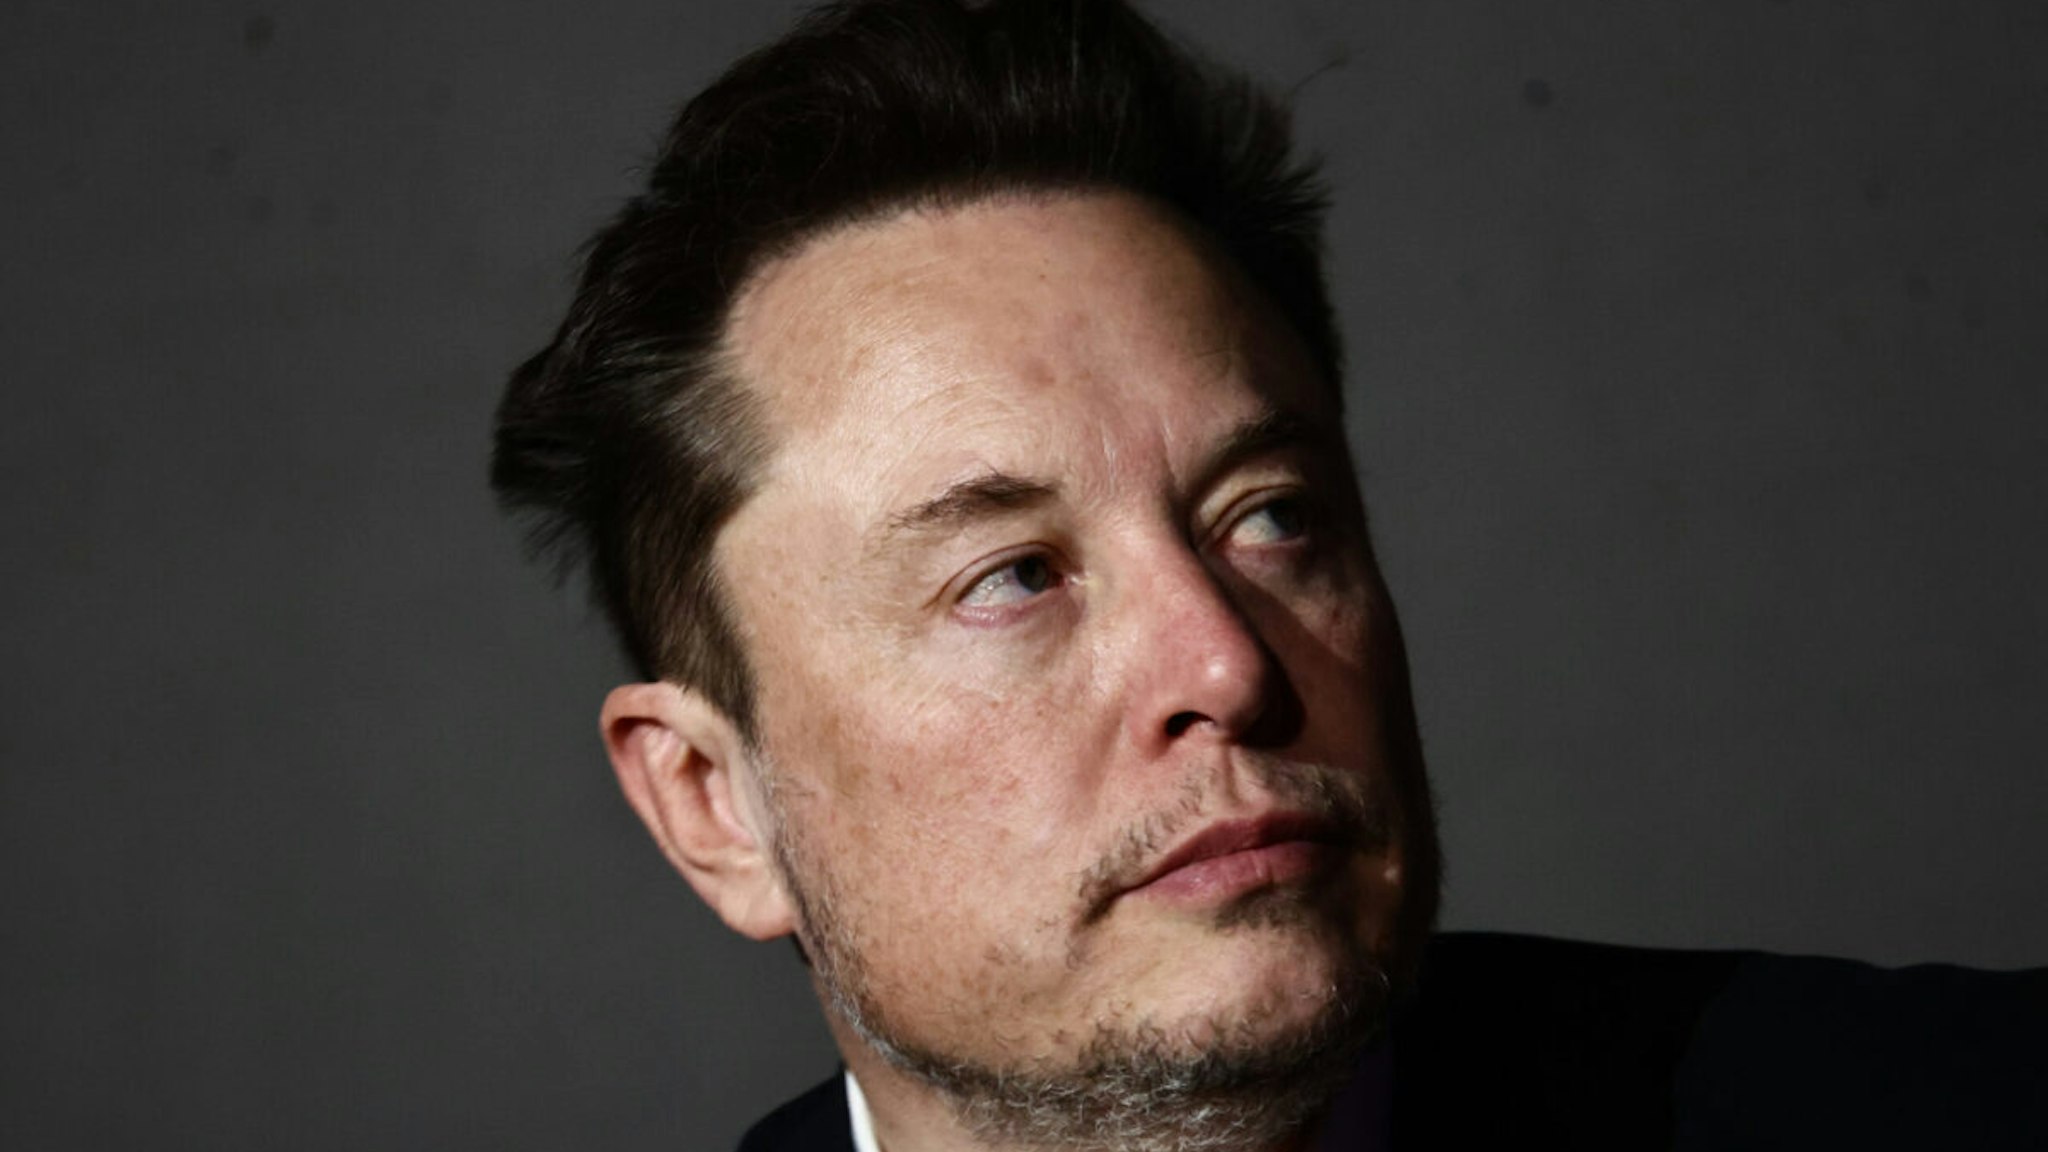 Elon Musk is speaking at the symposium about antisemitism, organized by the European Jewish Association, in Krakow, Poland, on January 22, 2024.